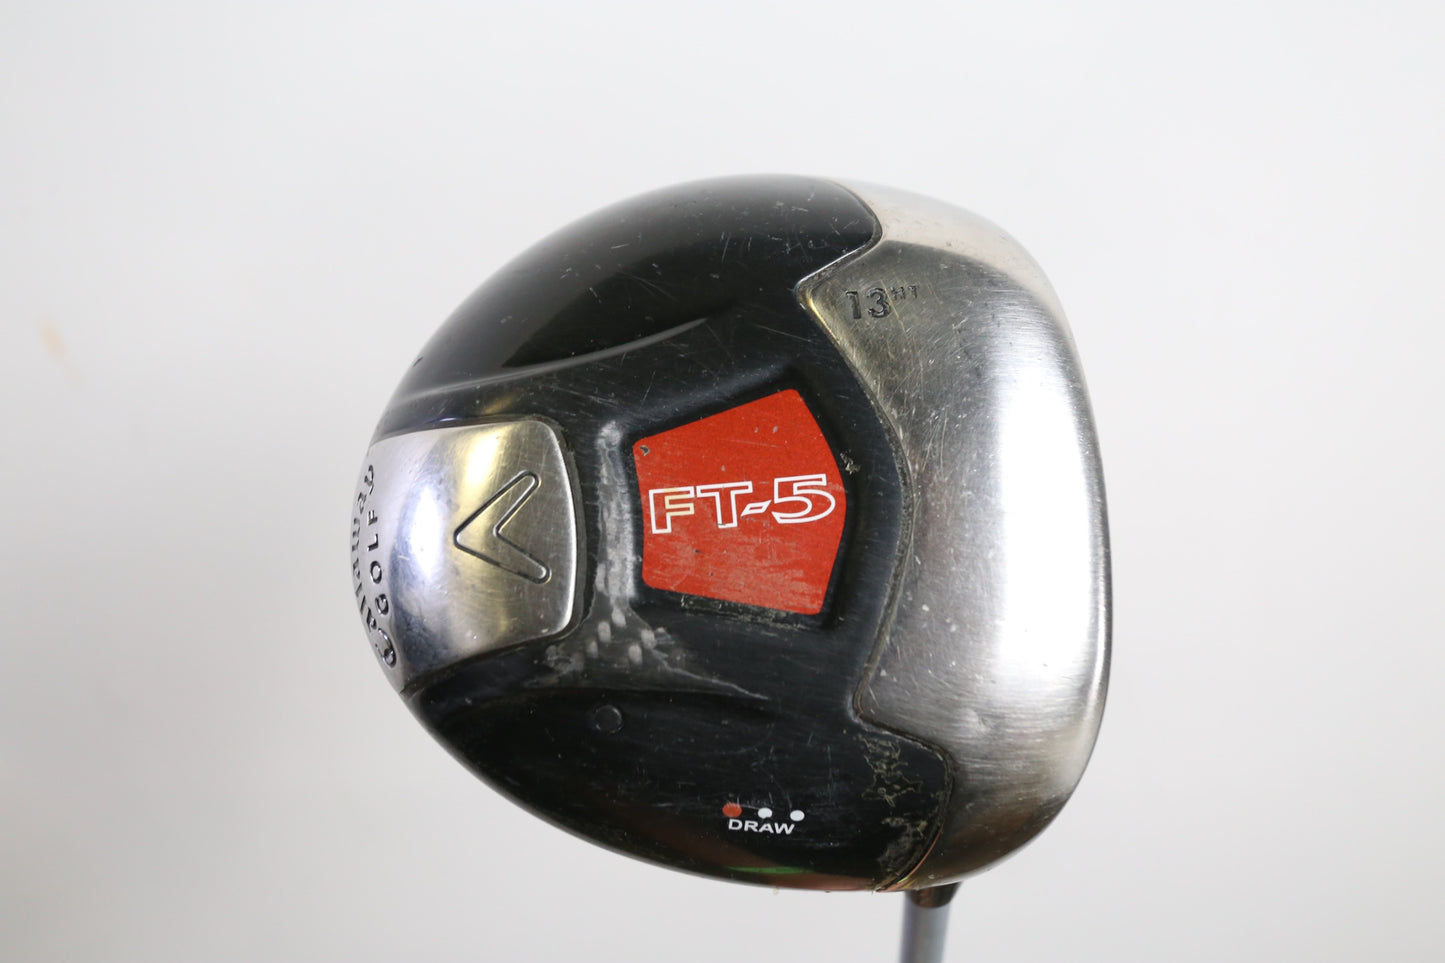 Used Callaway FT-5 Draw Driver - Right-Handed - 13 Degrees - Ladies Flex